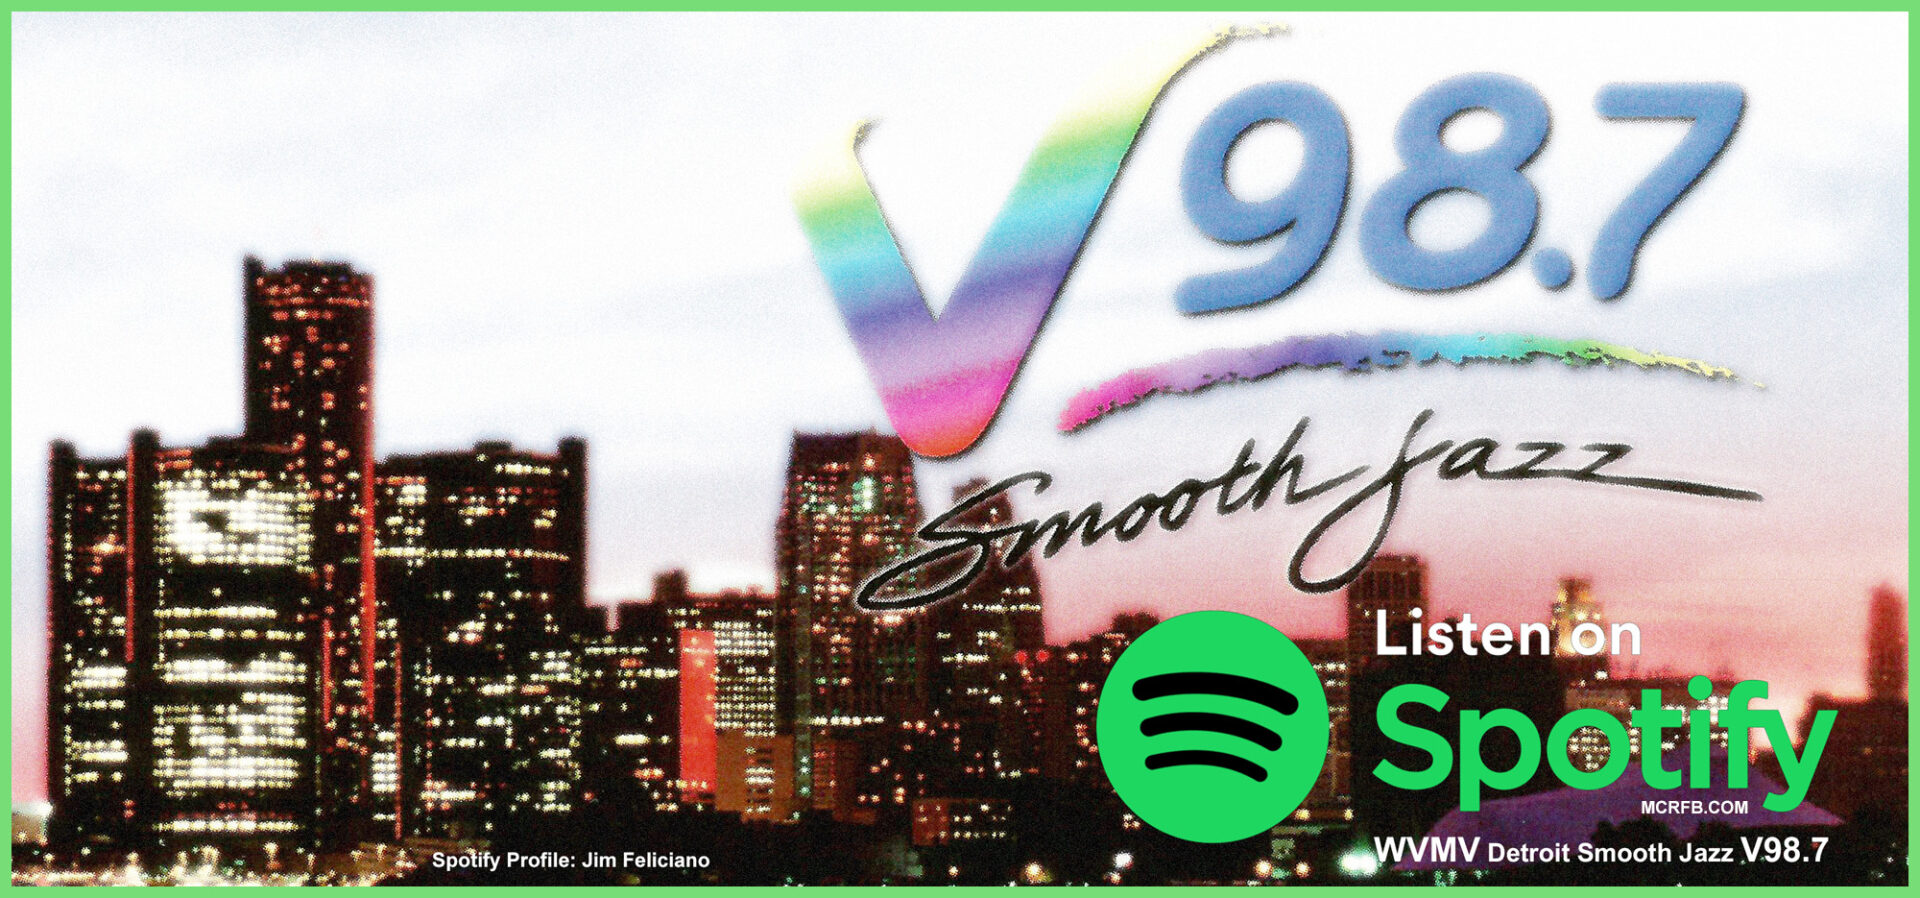 AUDACY DUMPS V98.7: SO WE MOVED 'DETROIT SMOOTH JAZZ' TO SPOTIFY